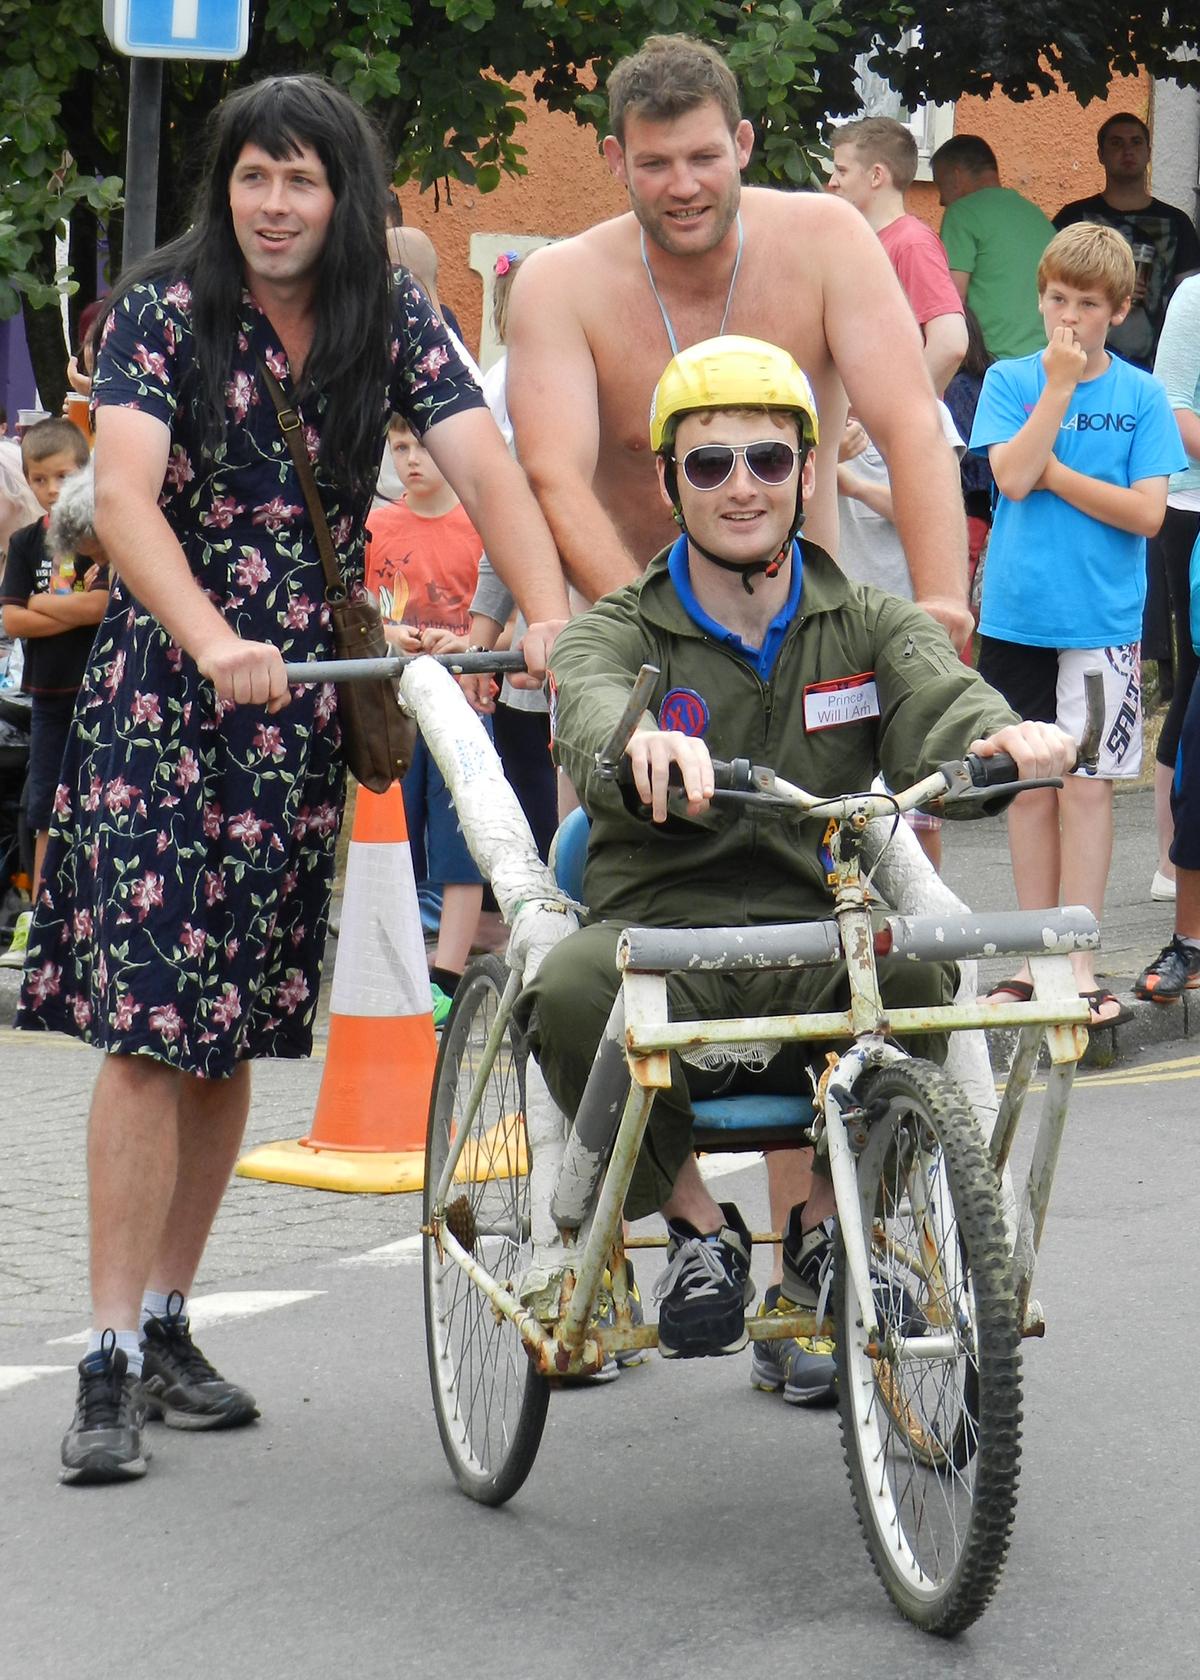 The popular Narberth pram race is an annual event held on the Wednesday of Civic Week each year.